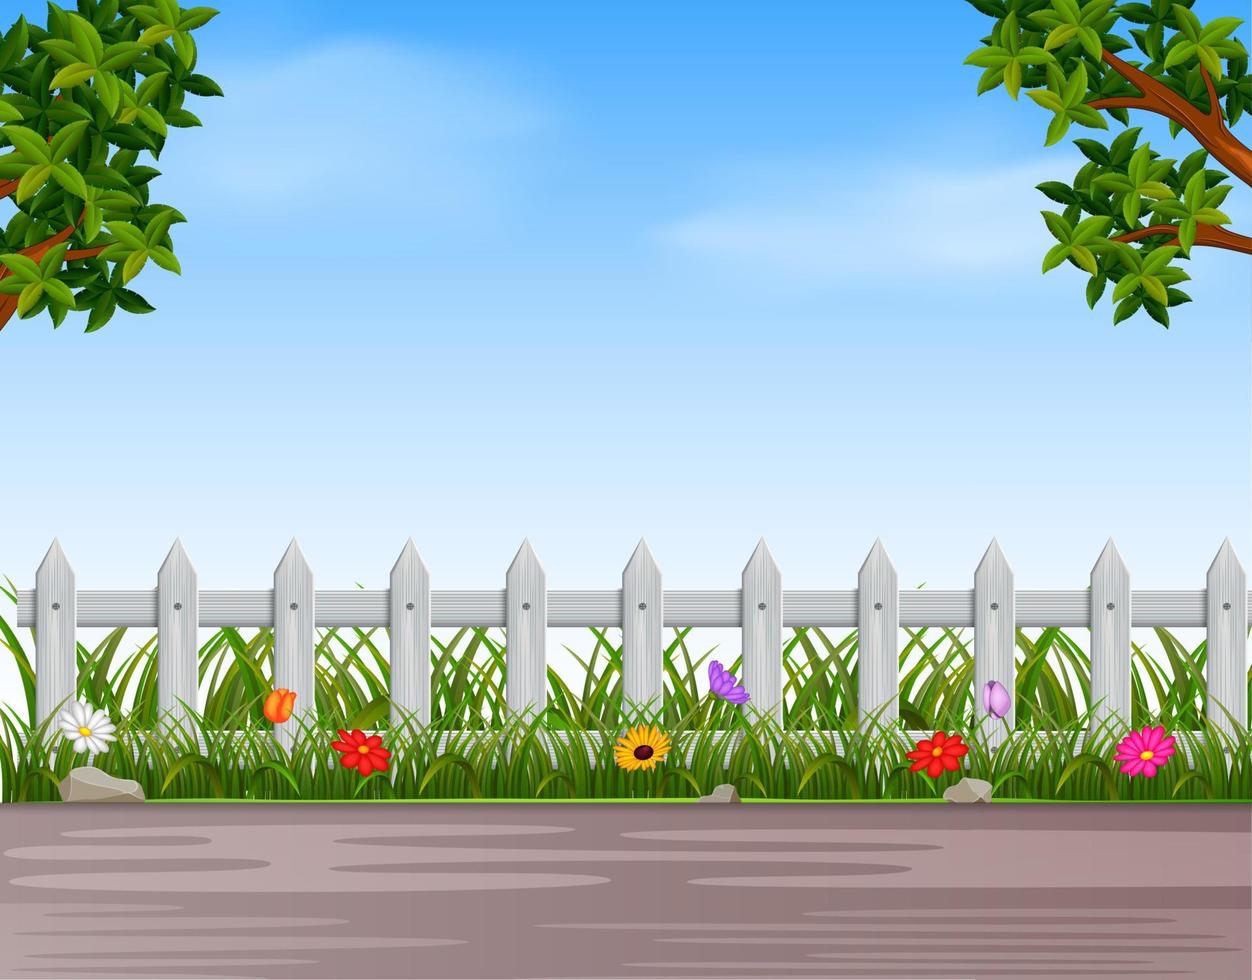 Garden with wooden fence and road vector